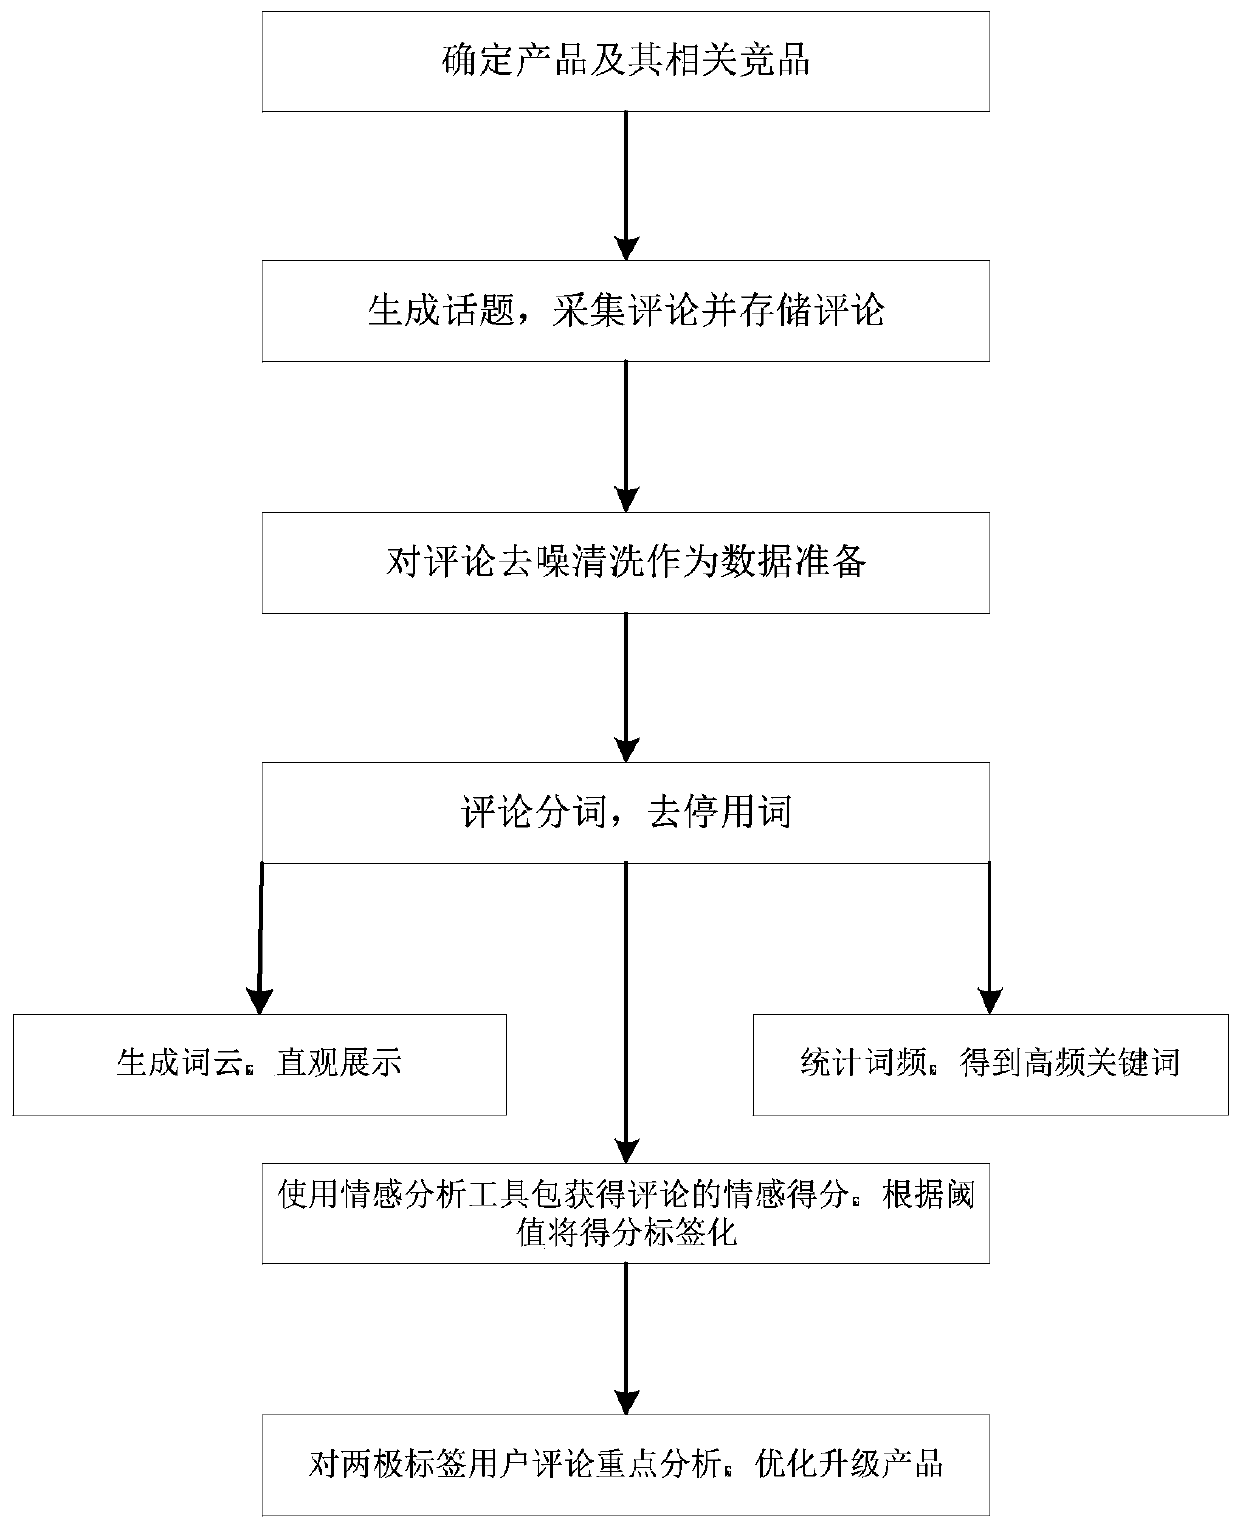 Big data-based competitive product analysis method and system, storage medium and electronic equipment